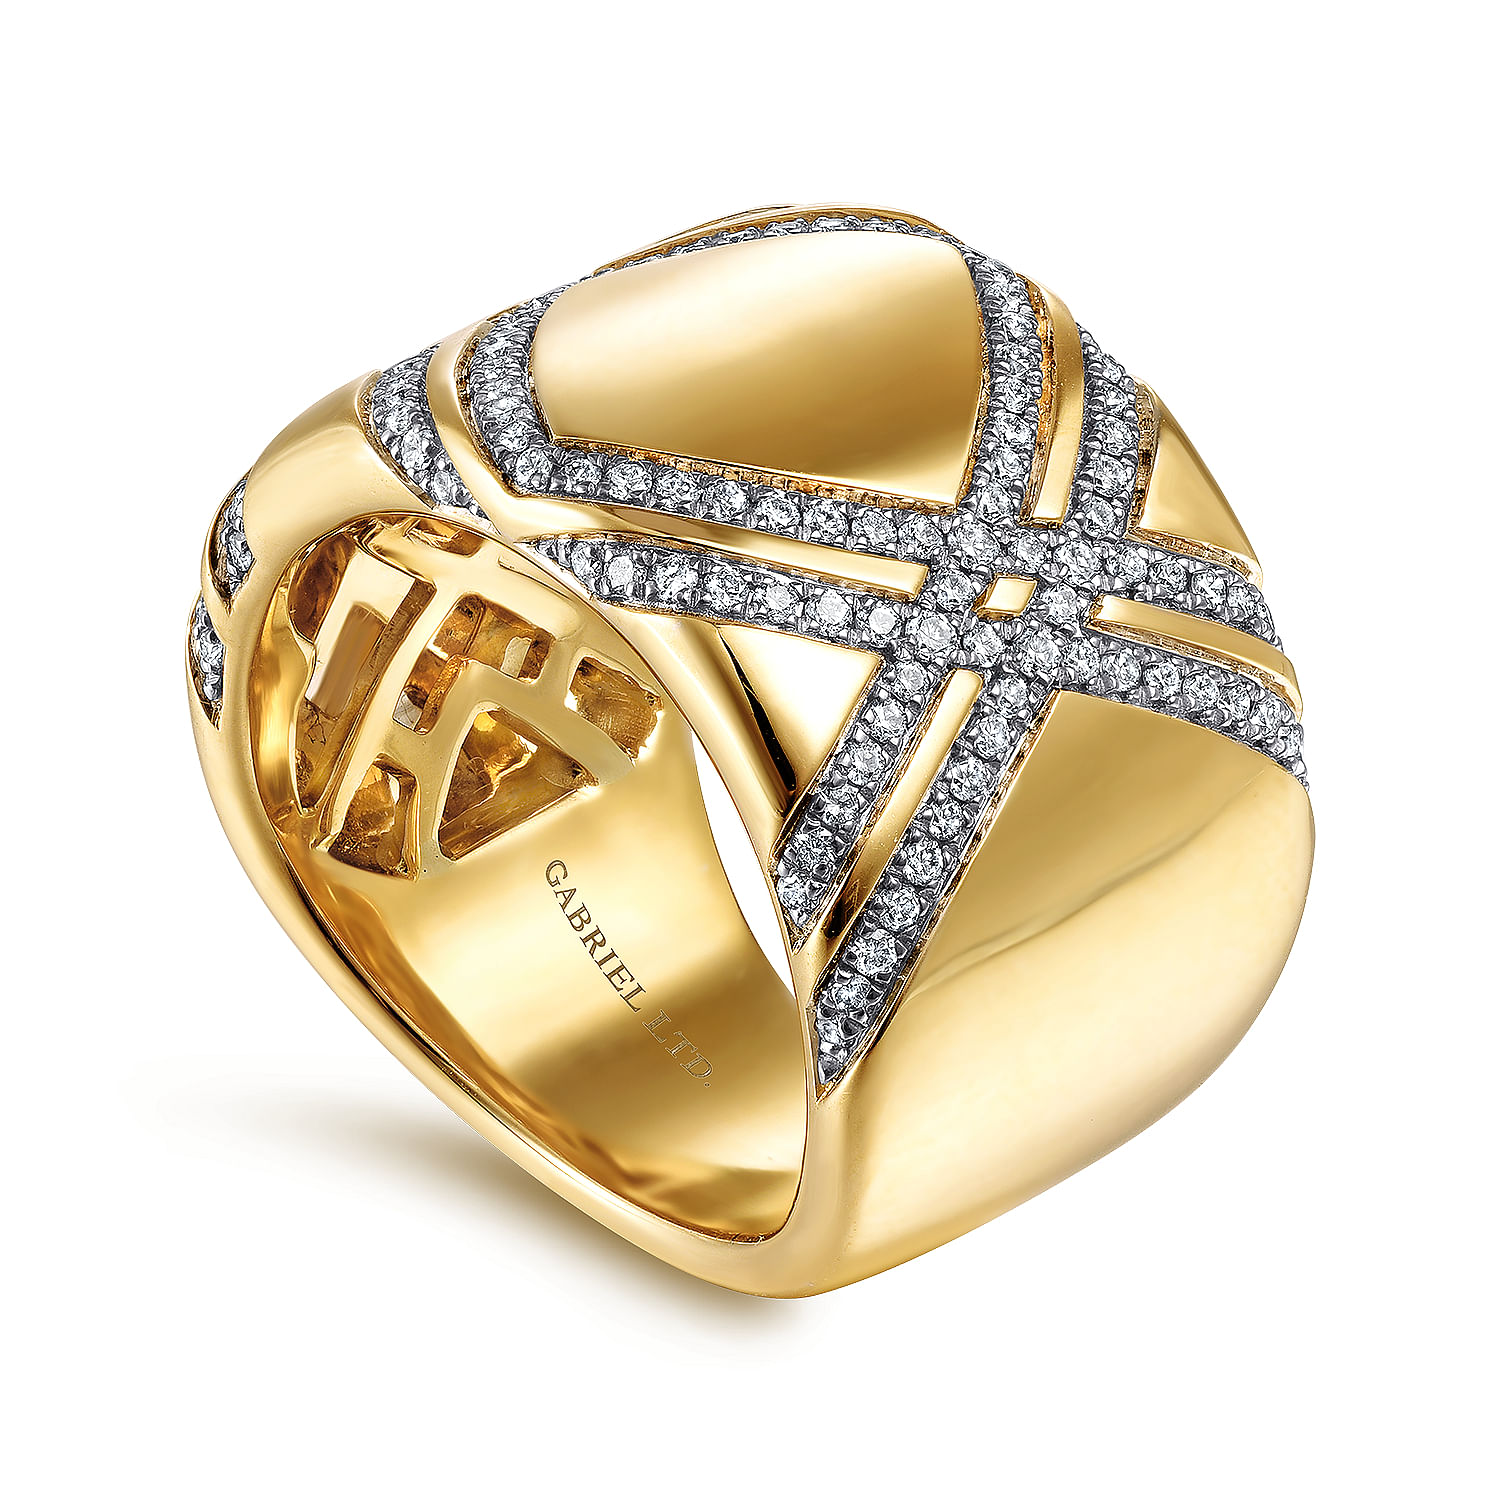 18K Yellow Gold Wide Diamond Ring with Diamond Criss Crossing Rows